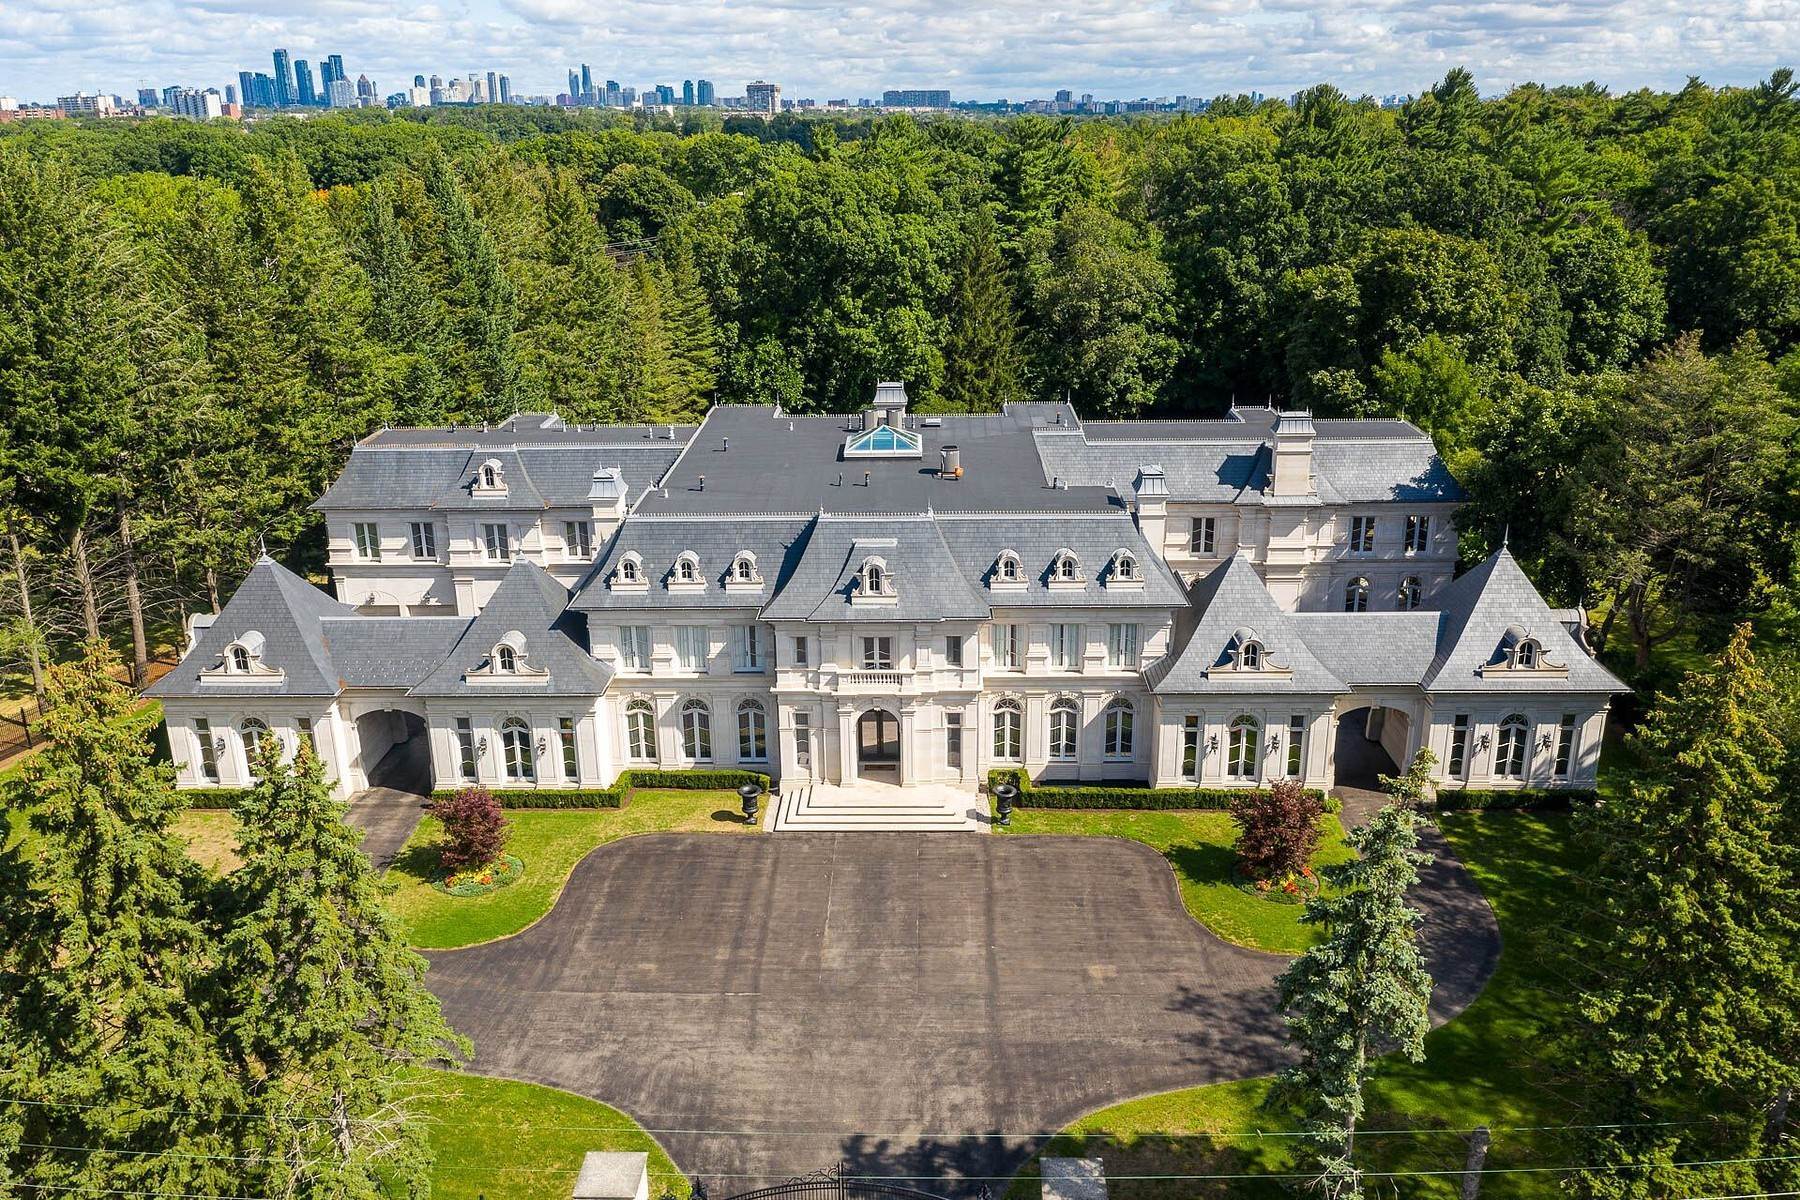 Single Family Homes for Sale at Chateau Inspired Estate 2275 Doulton Drive Mississauga, Ontario L5H 3M2 Canada